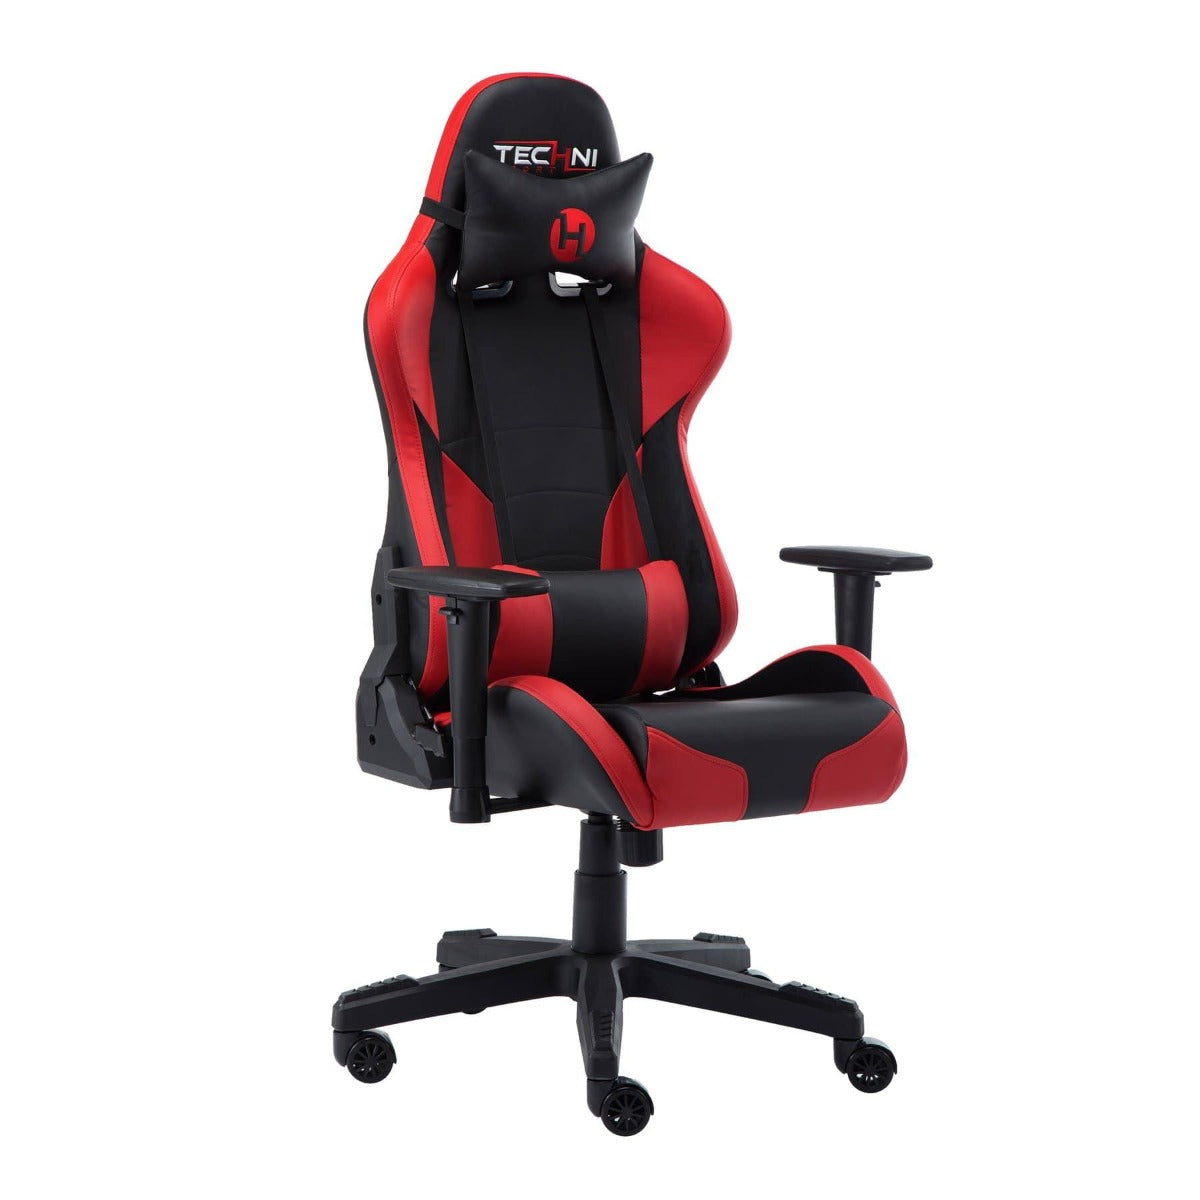 Techni Sport TS-90 Red Office-PC Gaming Chair RTA-TS90-RED